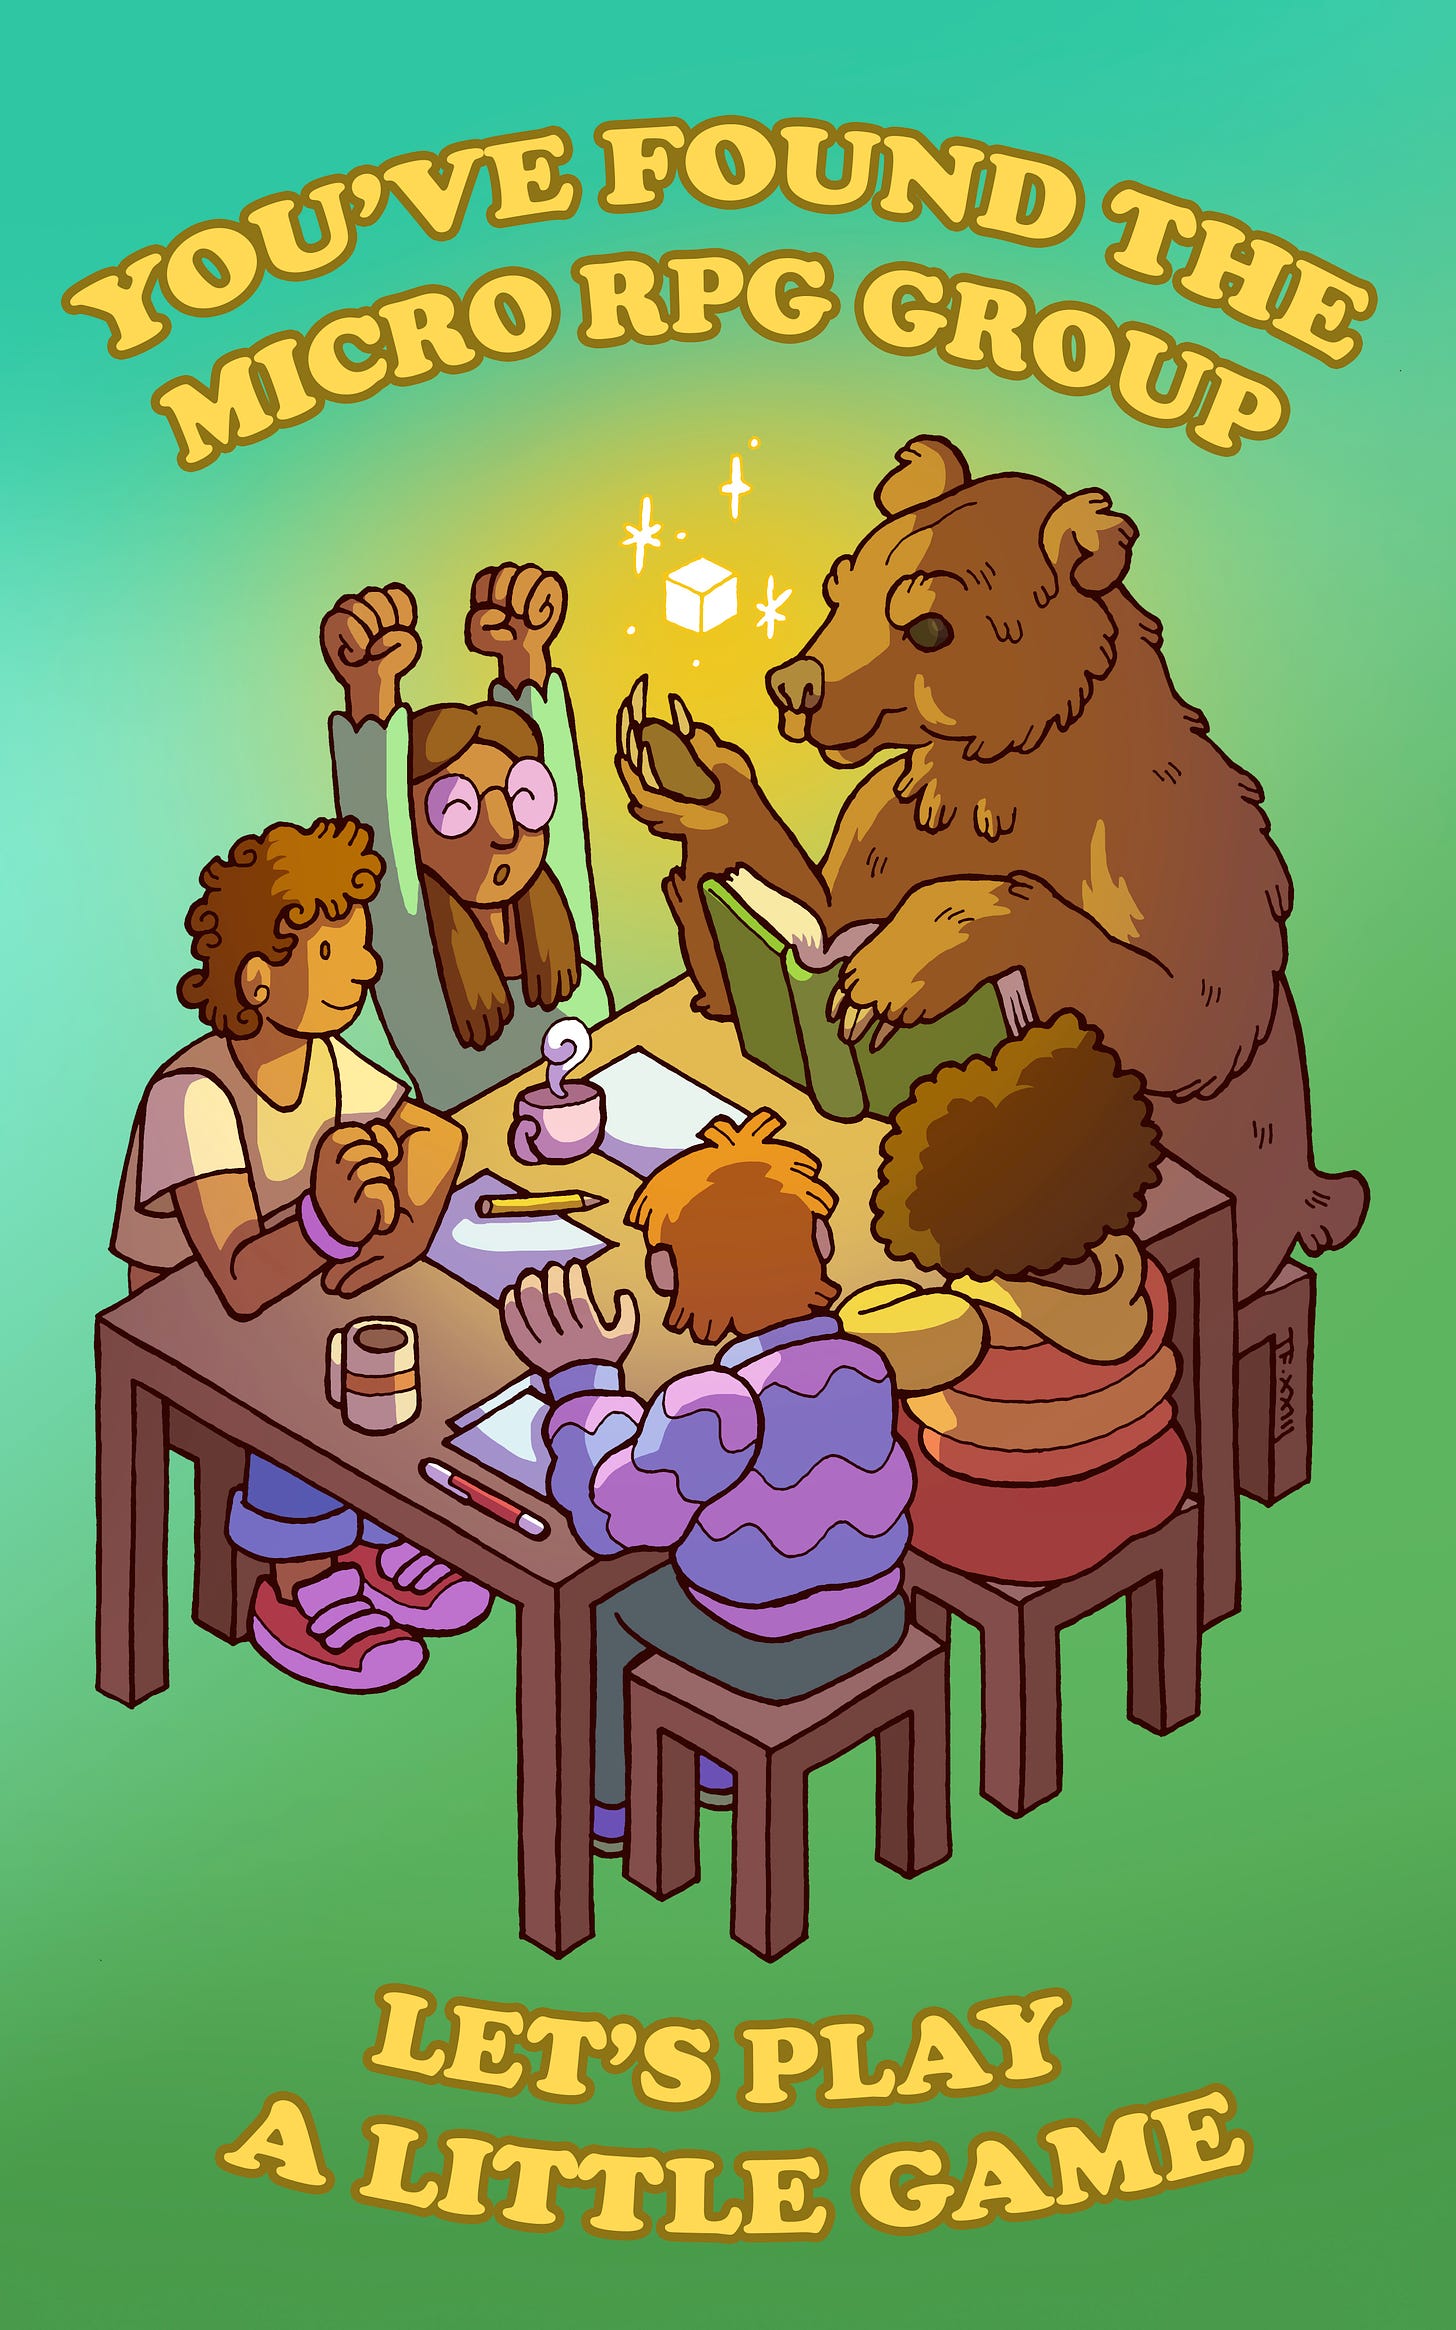 Traditionally hand drawn and digitally coloured isometric illustration of a group of human TTRPG players seated around a table, being lead in their game by a big brown bear, a golden die floating above his raised right paw. Green gradient background, text reads: You’ve found the micro RPG group, let’s play a little game”.